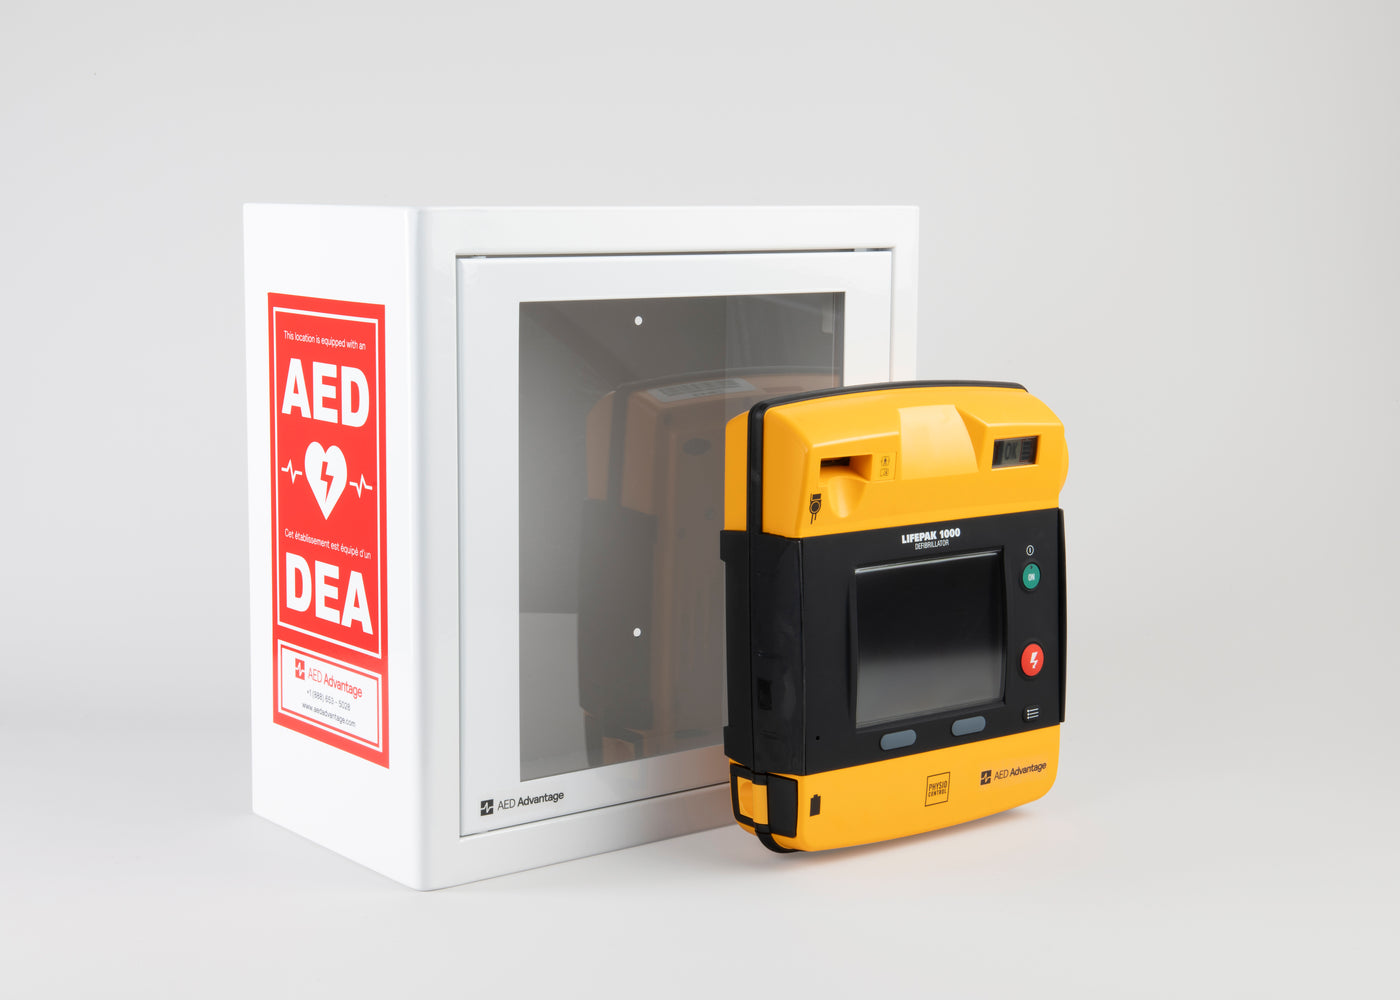 A black and yellow LIFEPAK 1000 AED standing in front of a white metal cabinet with red decals